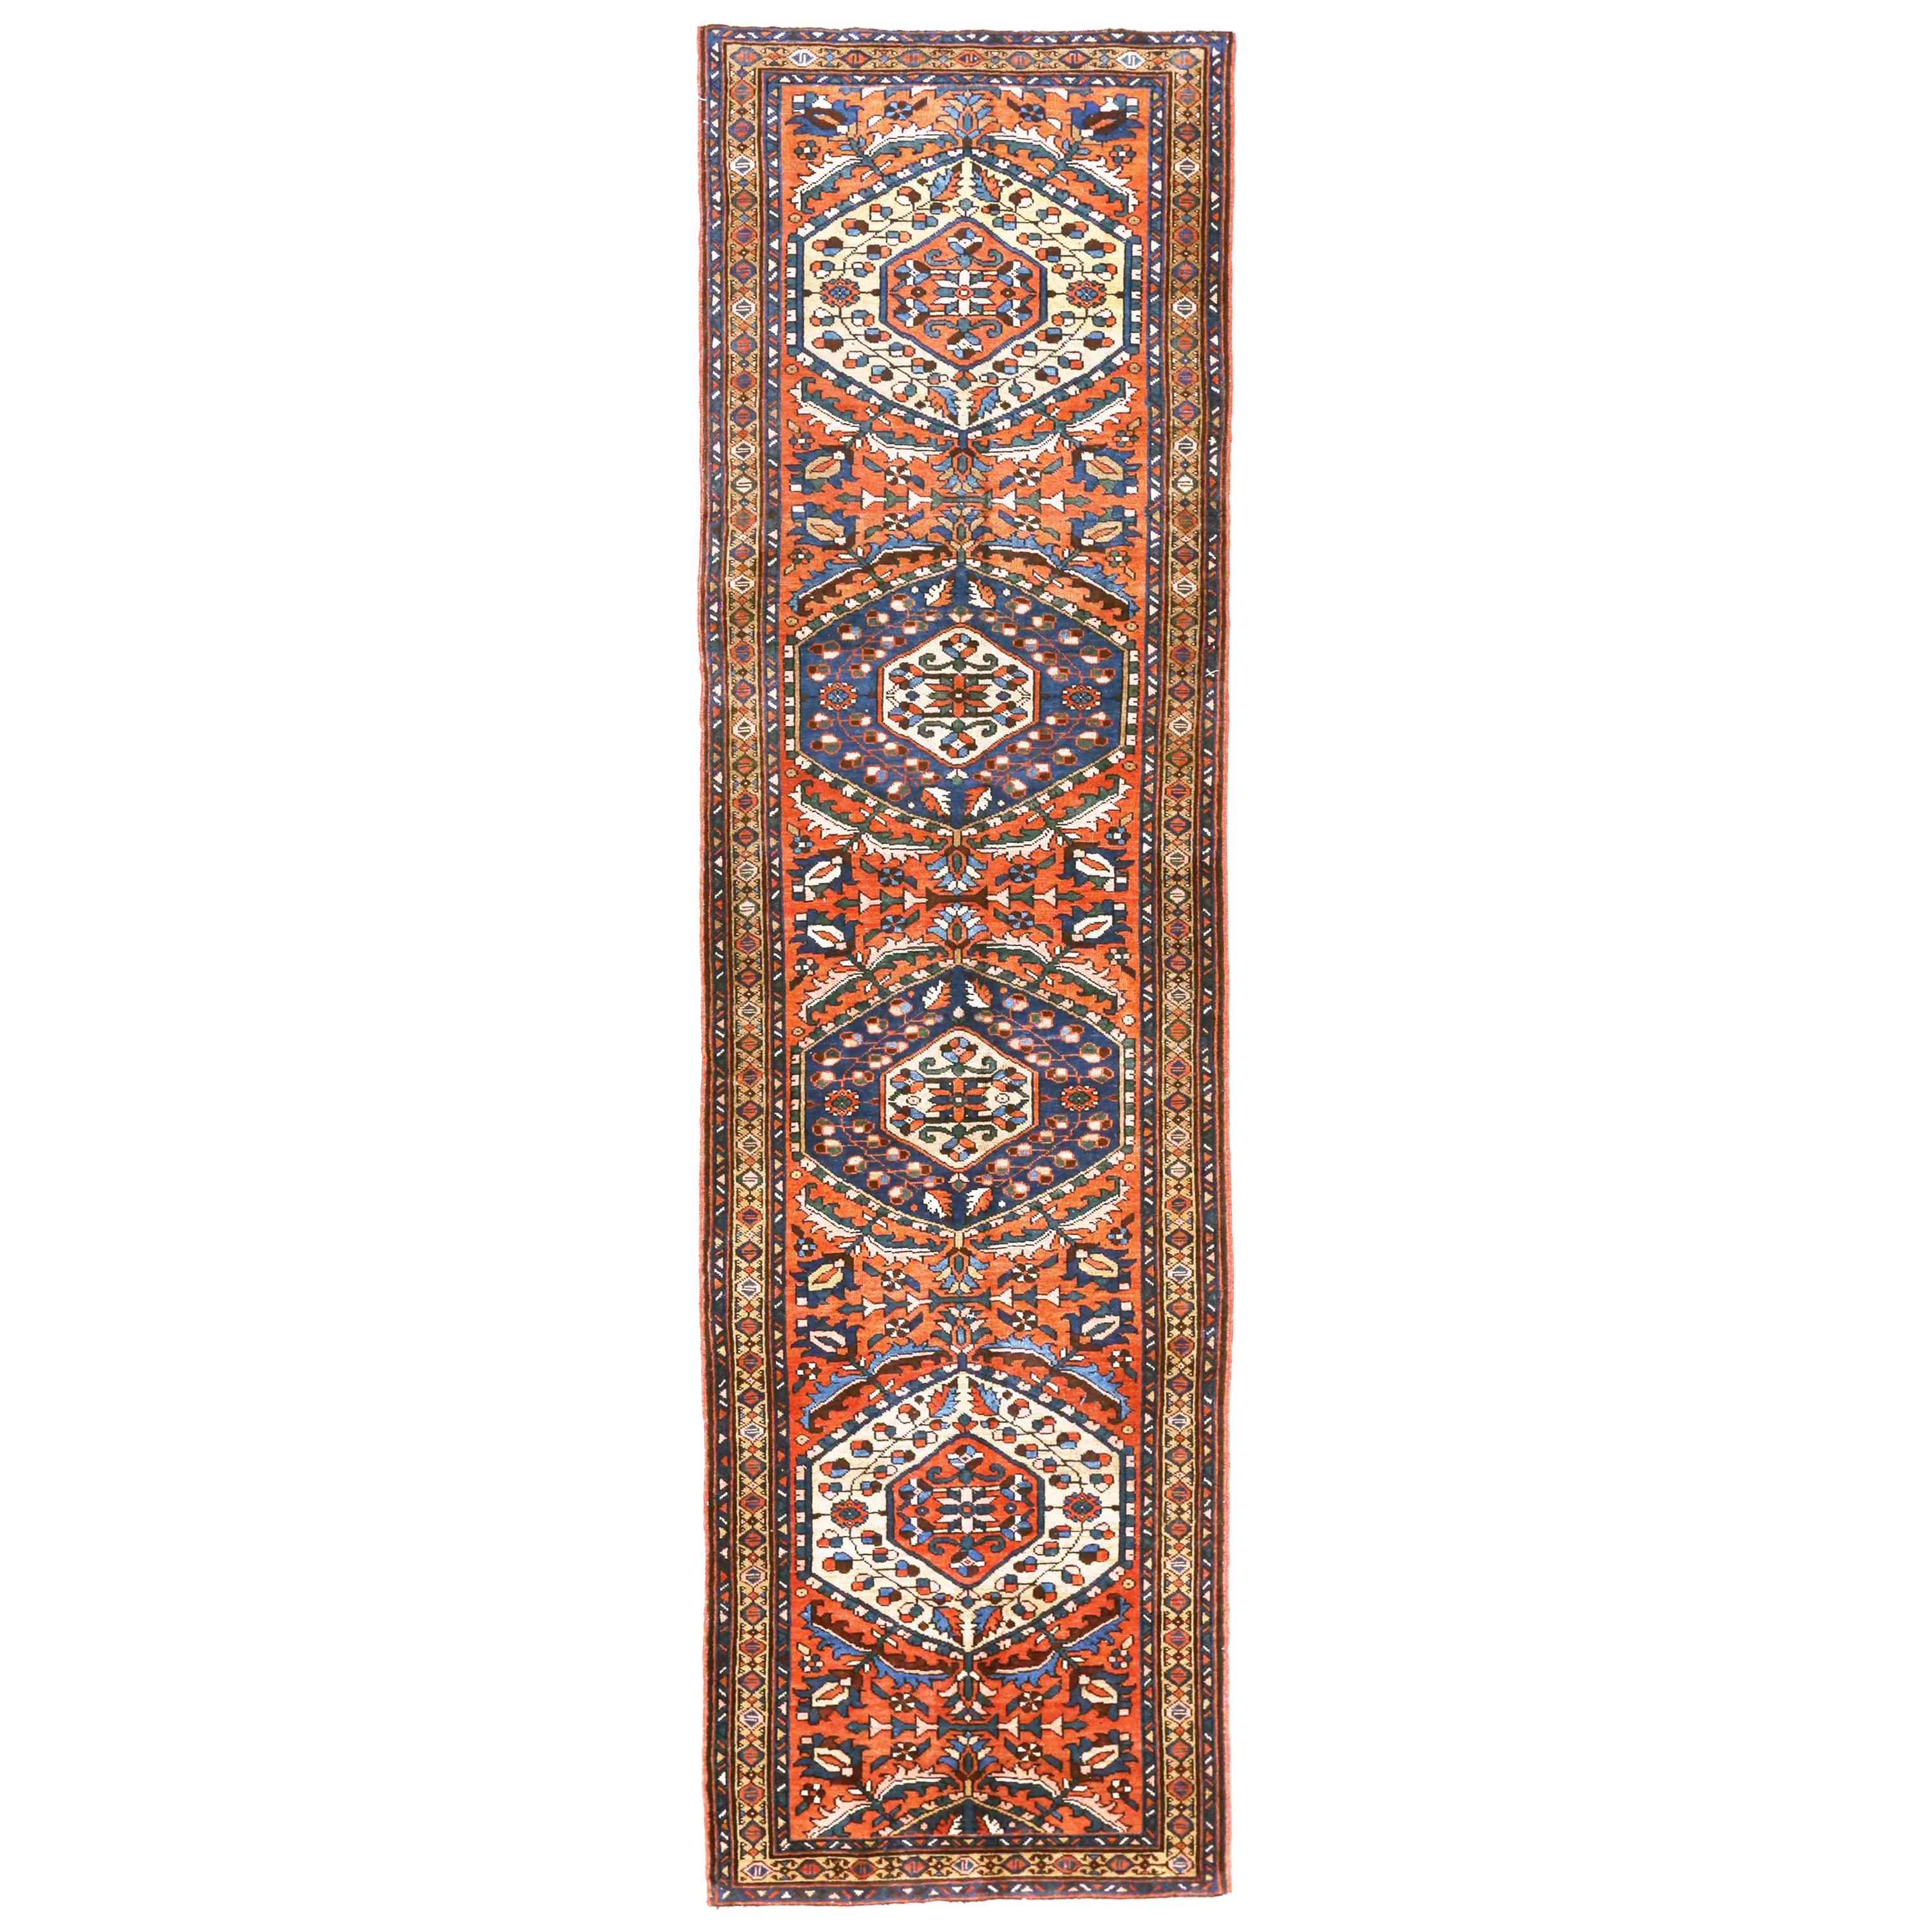 Antique Persian Rug Azerbaijan Design with Nature-Inspired Patterns, circa 1960s For Sale